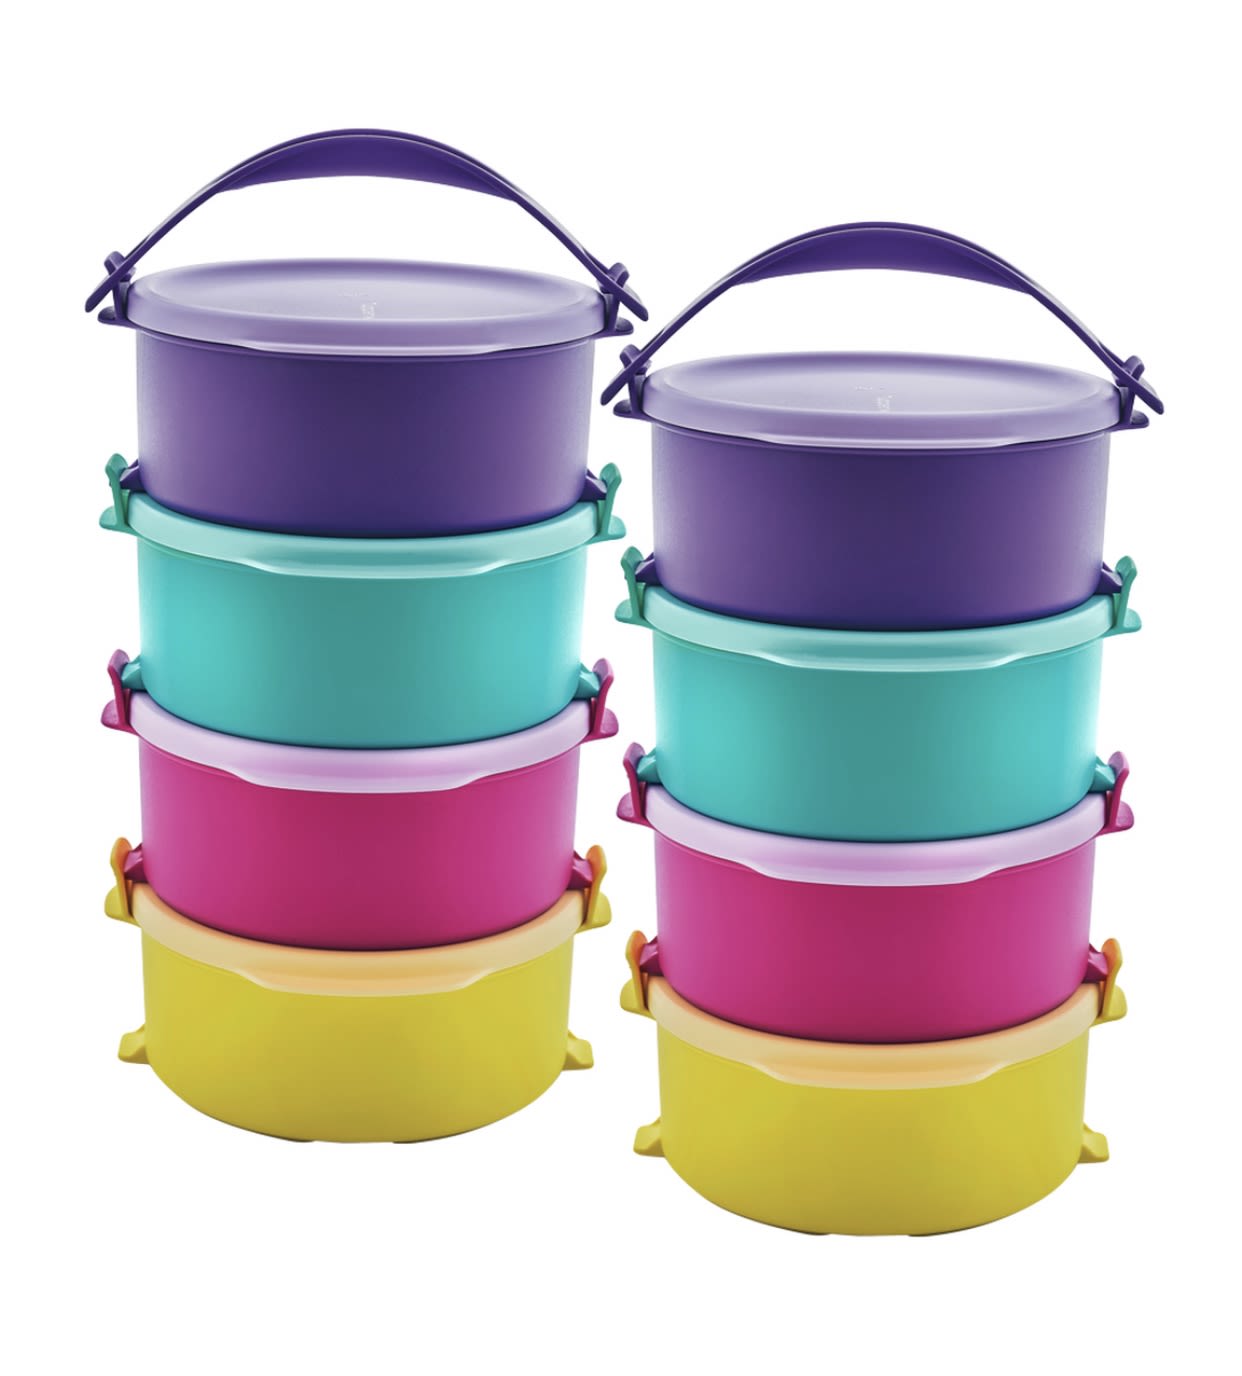 Food Containers For Sale in Malaysia